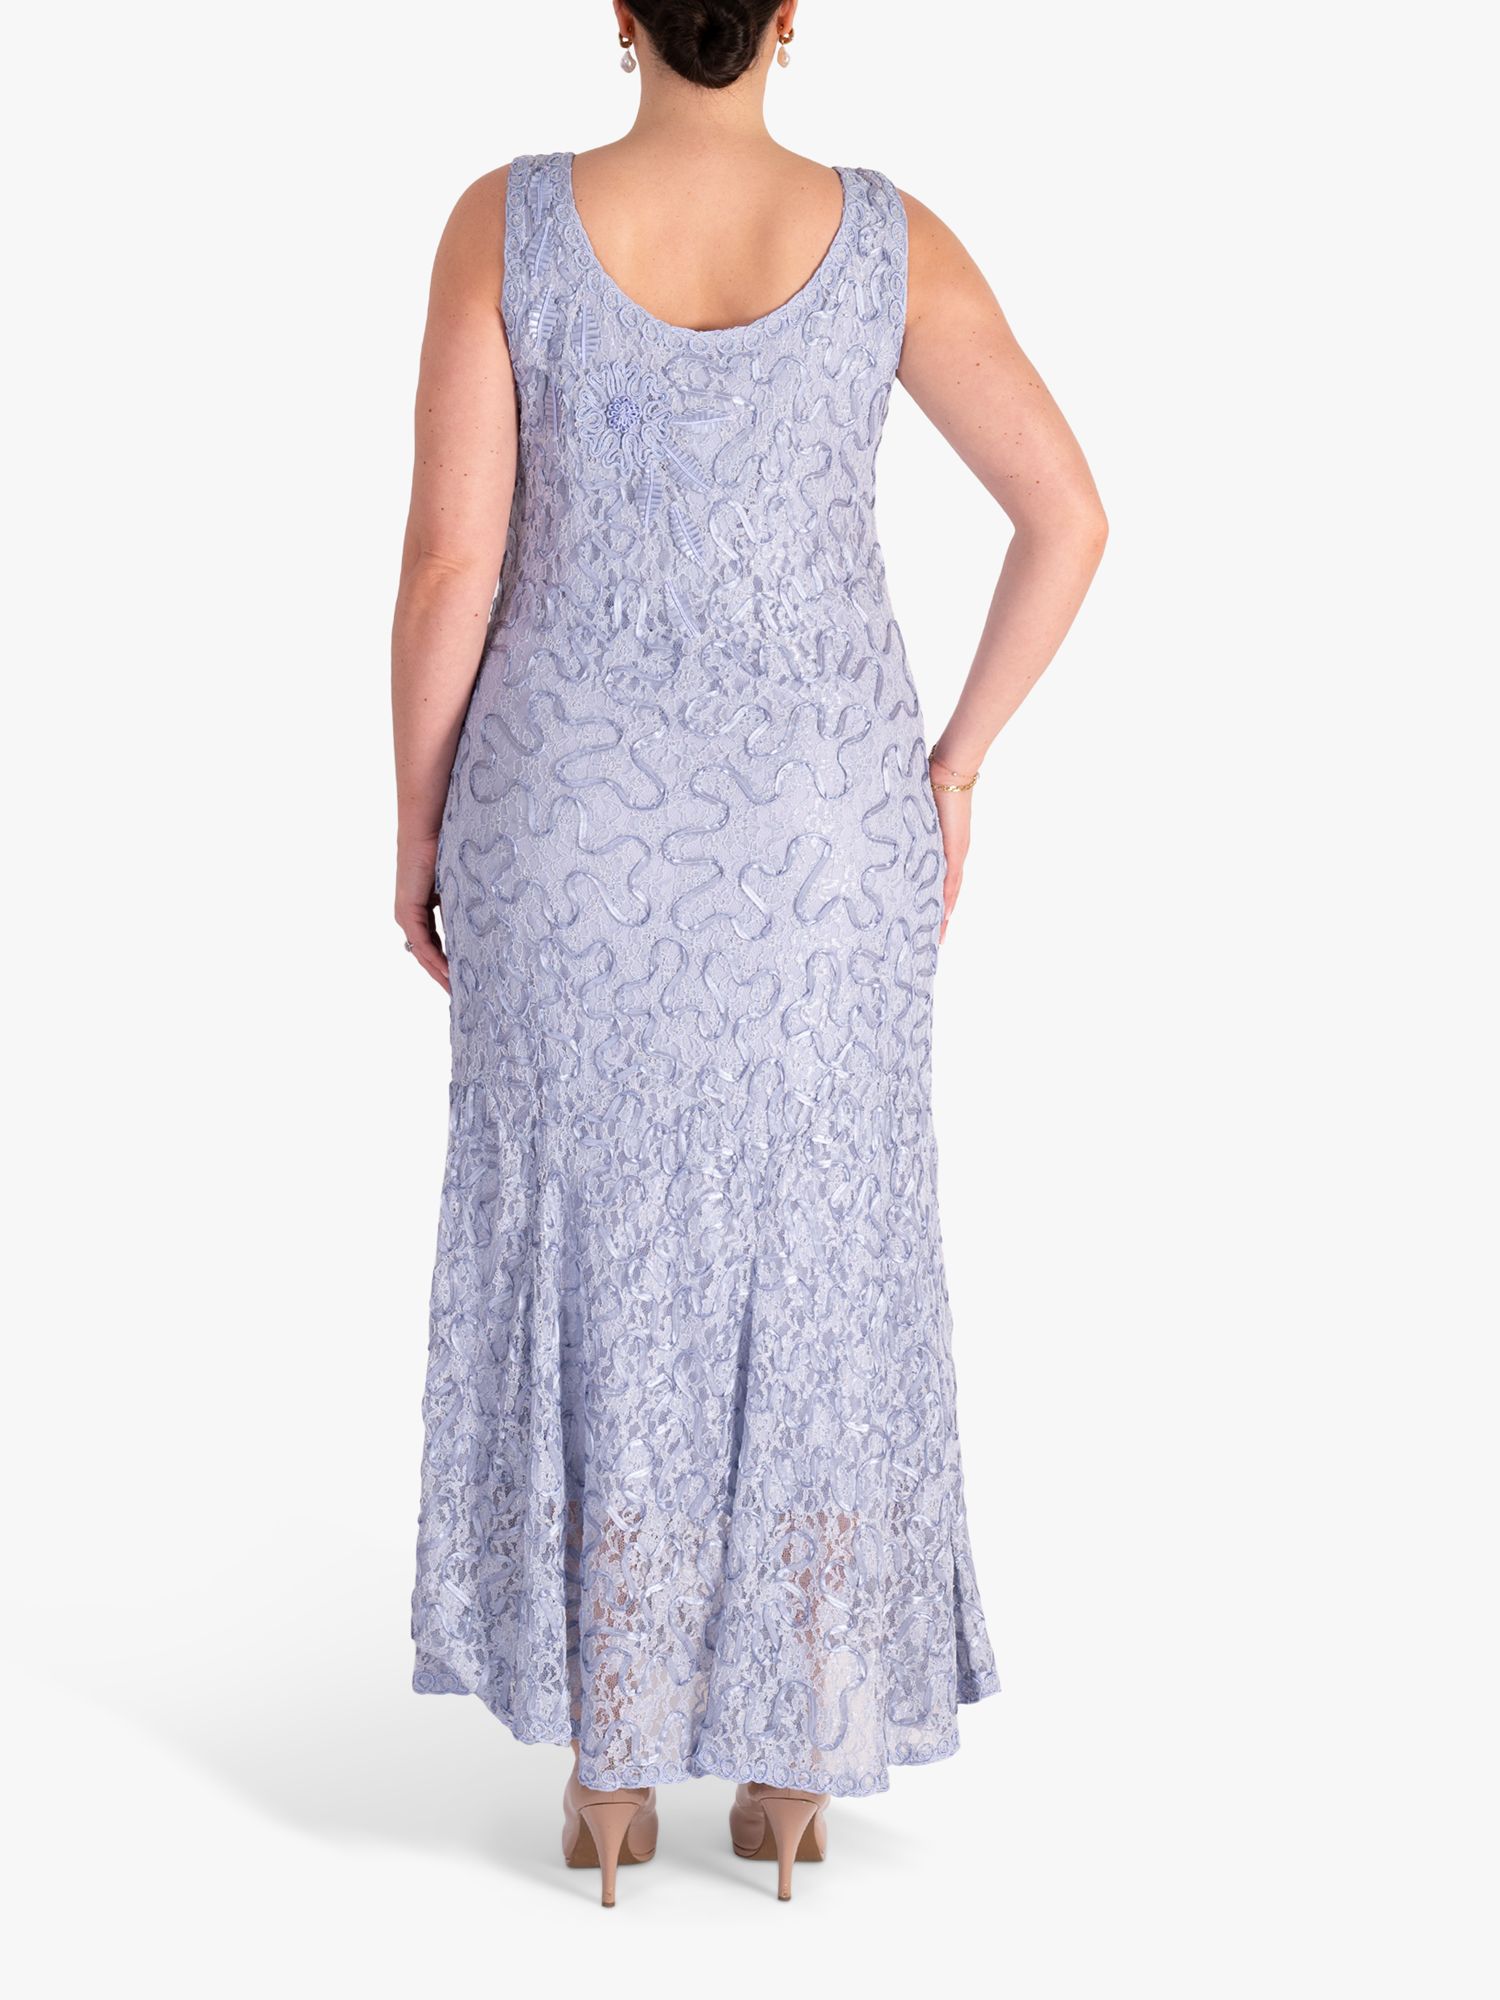 chesca Lace & Cornelli Tapework Dress, Lilac at John Lewis & Partners